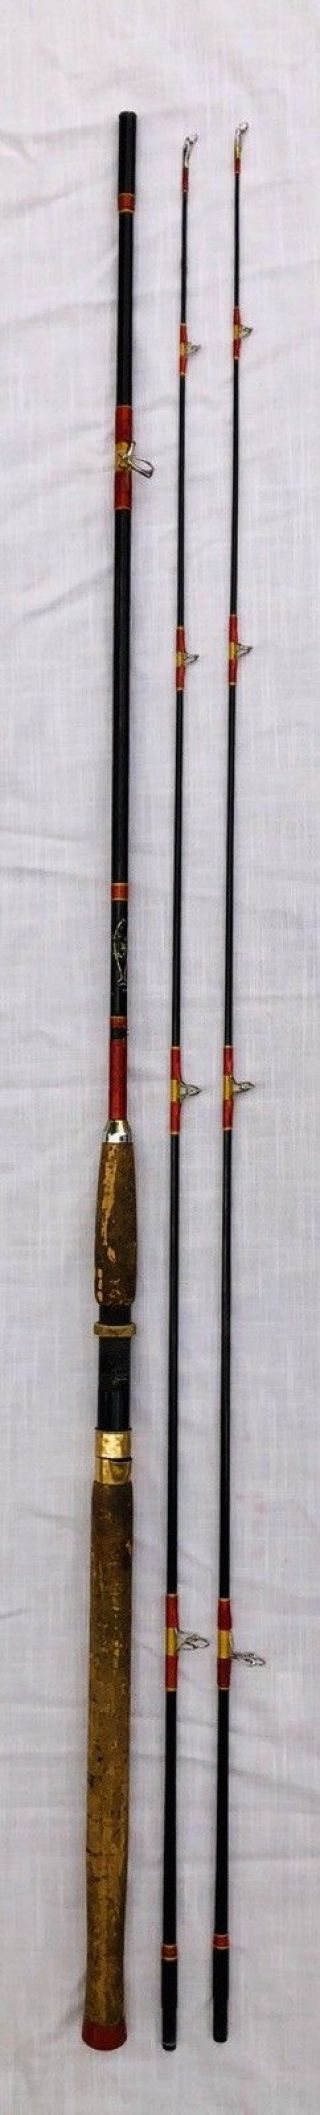 Vintage Harnell Surf Fishing Pole Rod 8’ 2 - Piece W/extra Tip